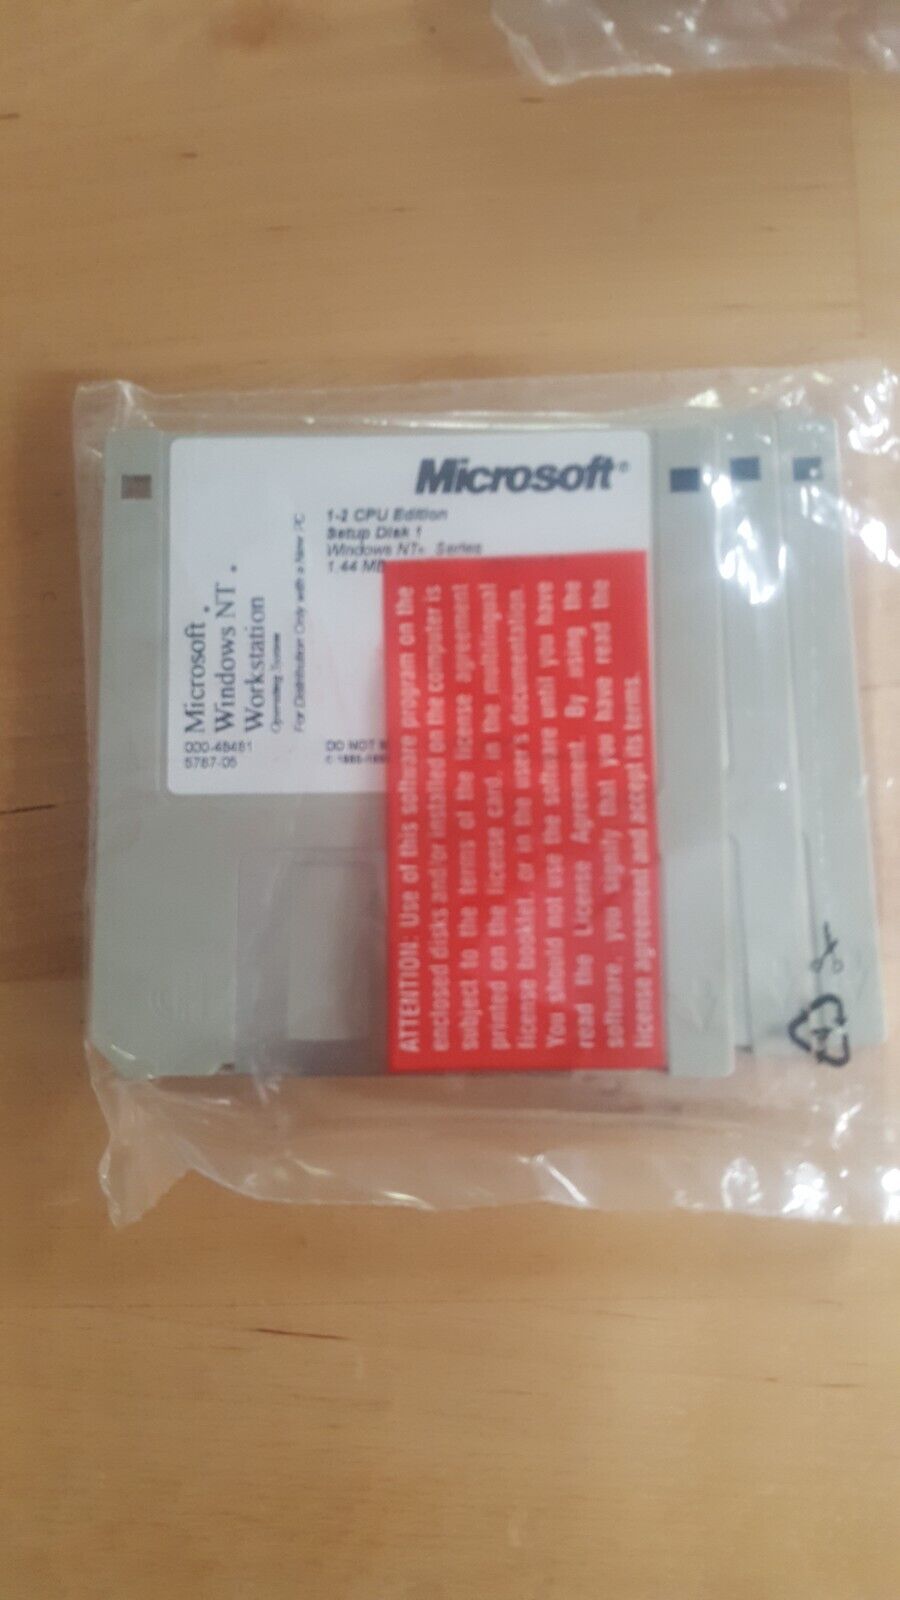 Boot Disk NEW Microsoft Windows NT Workstation 1-2 CPU Edition 3.5 Floppy Disks